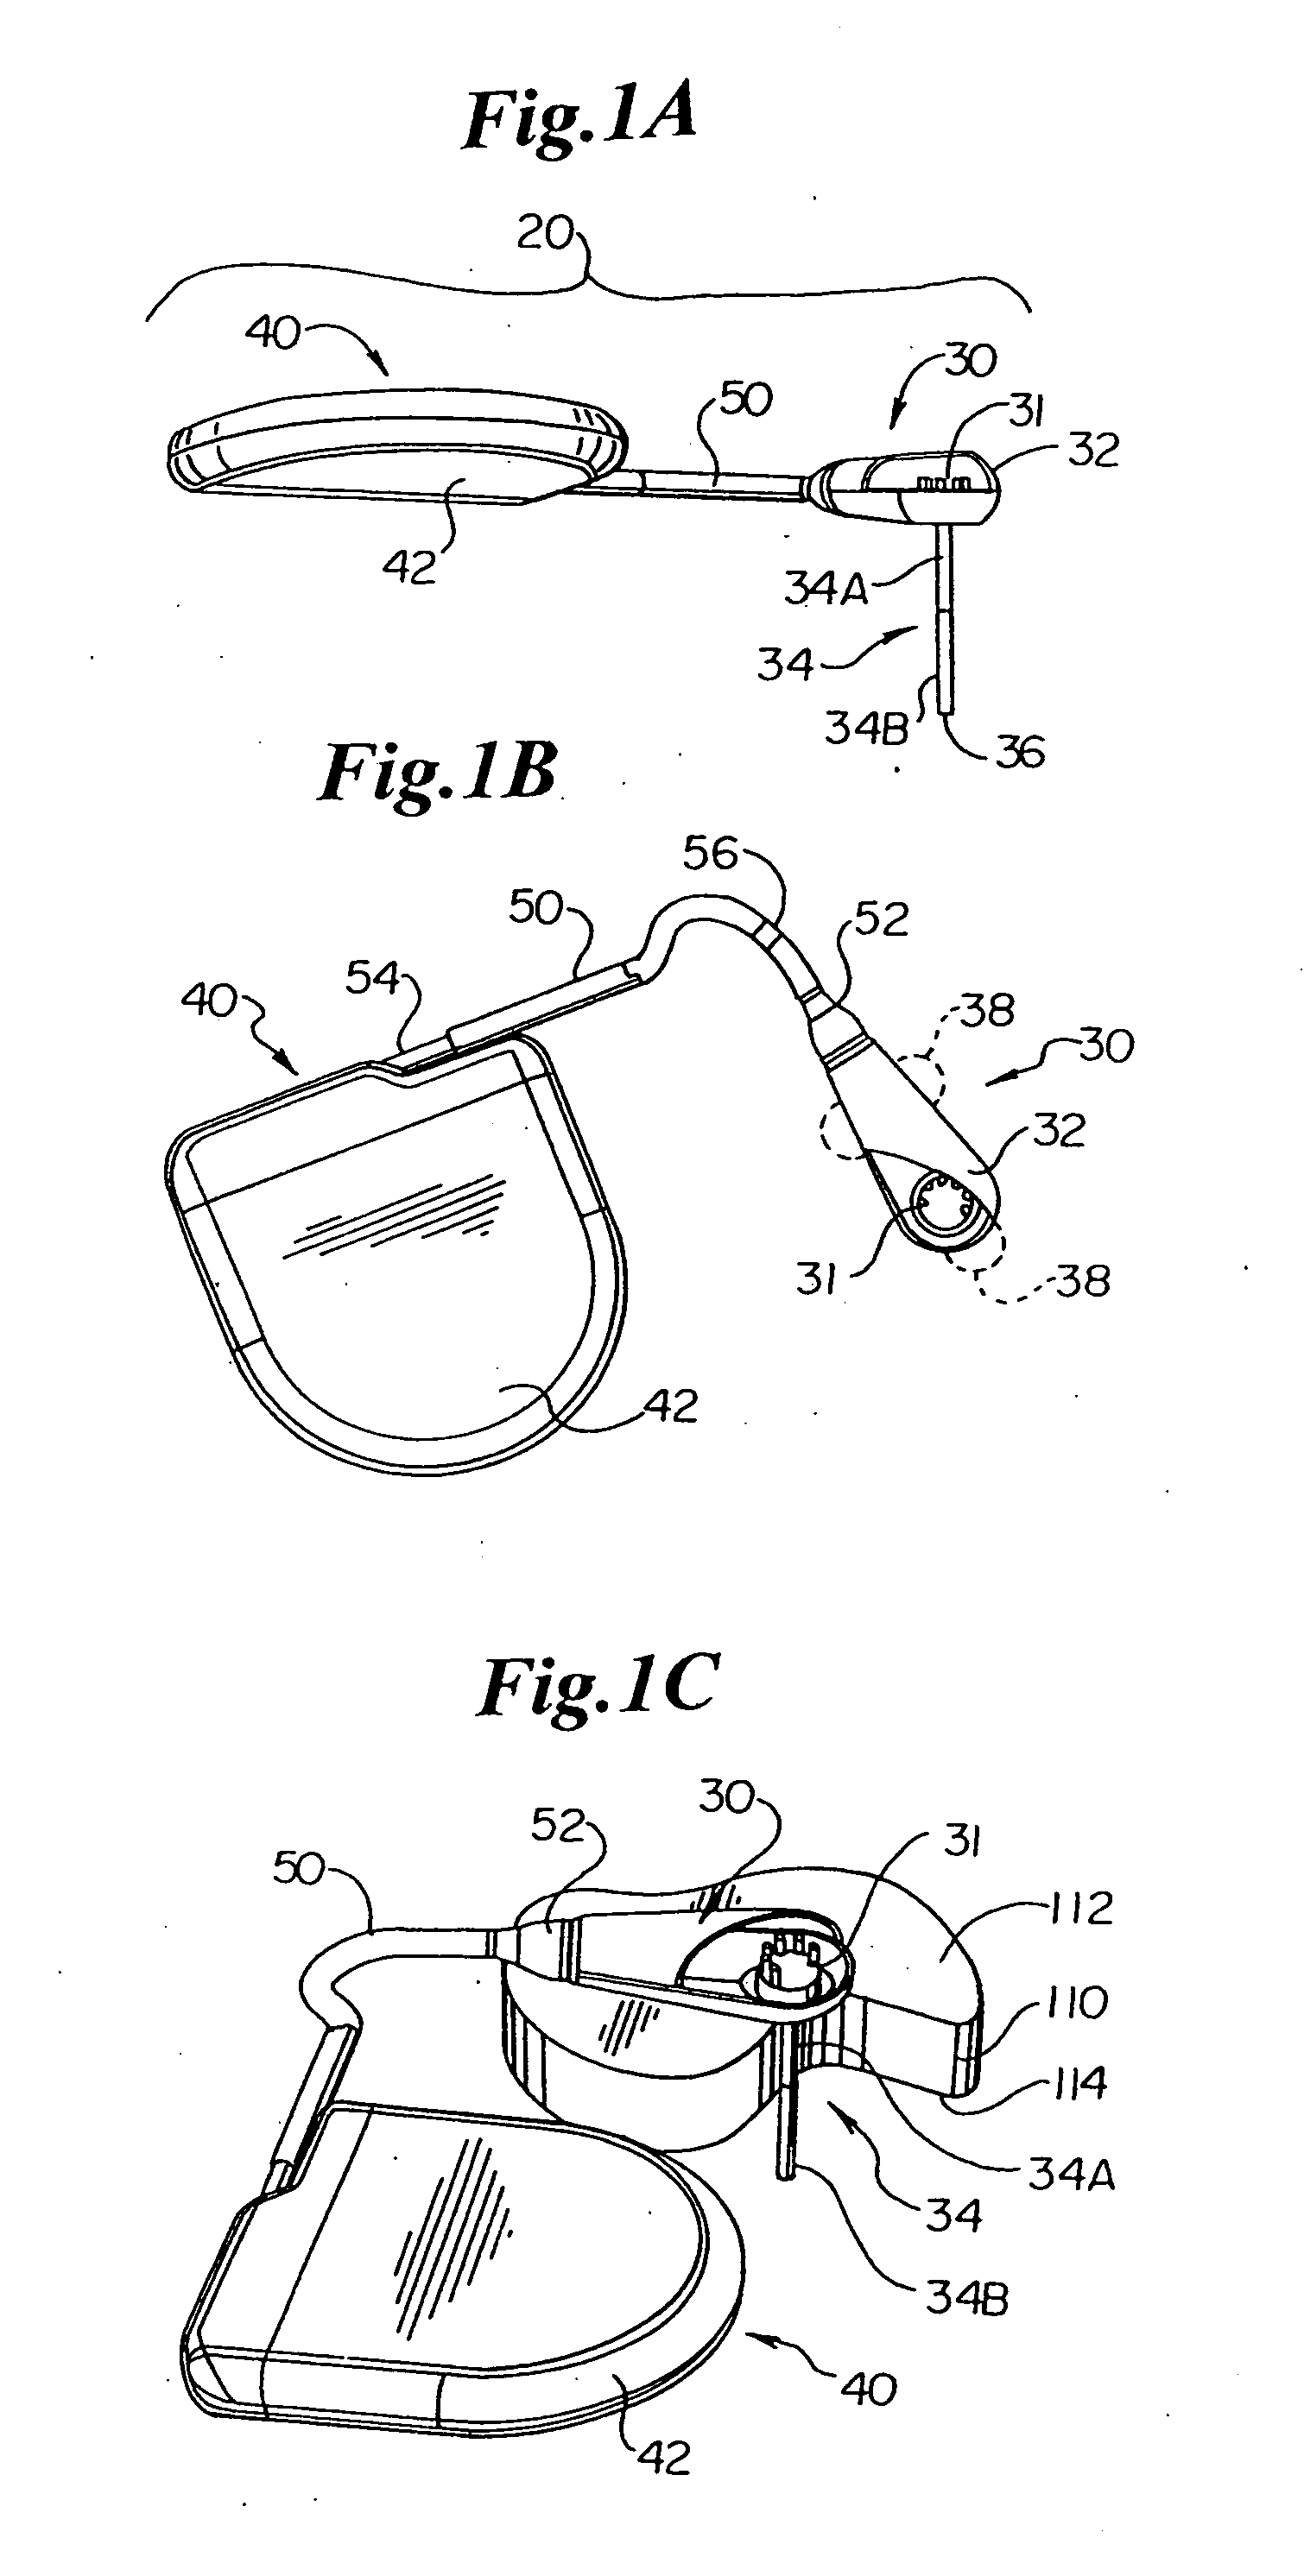 Devices, systems and methods for endocardial pressure measurement